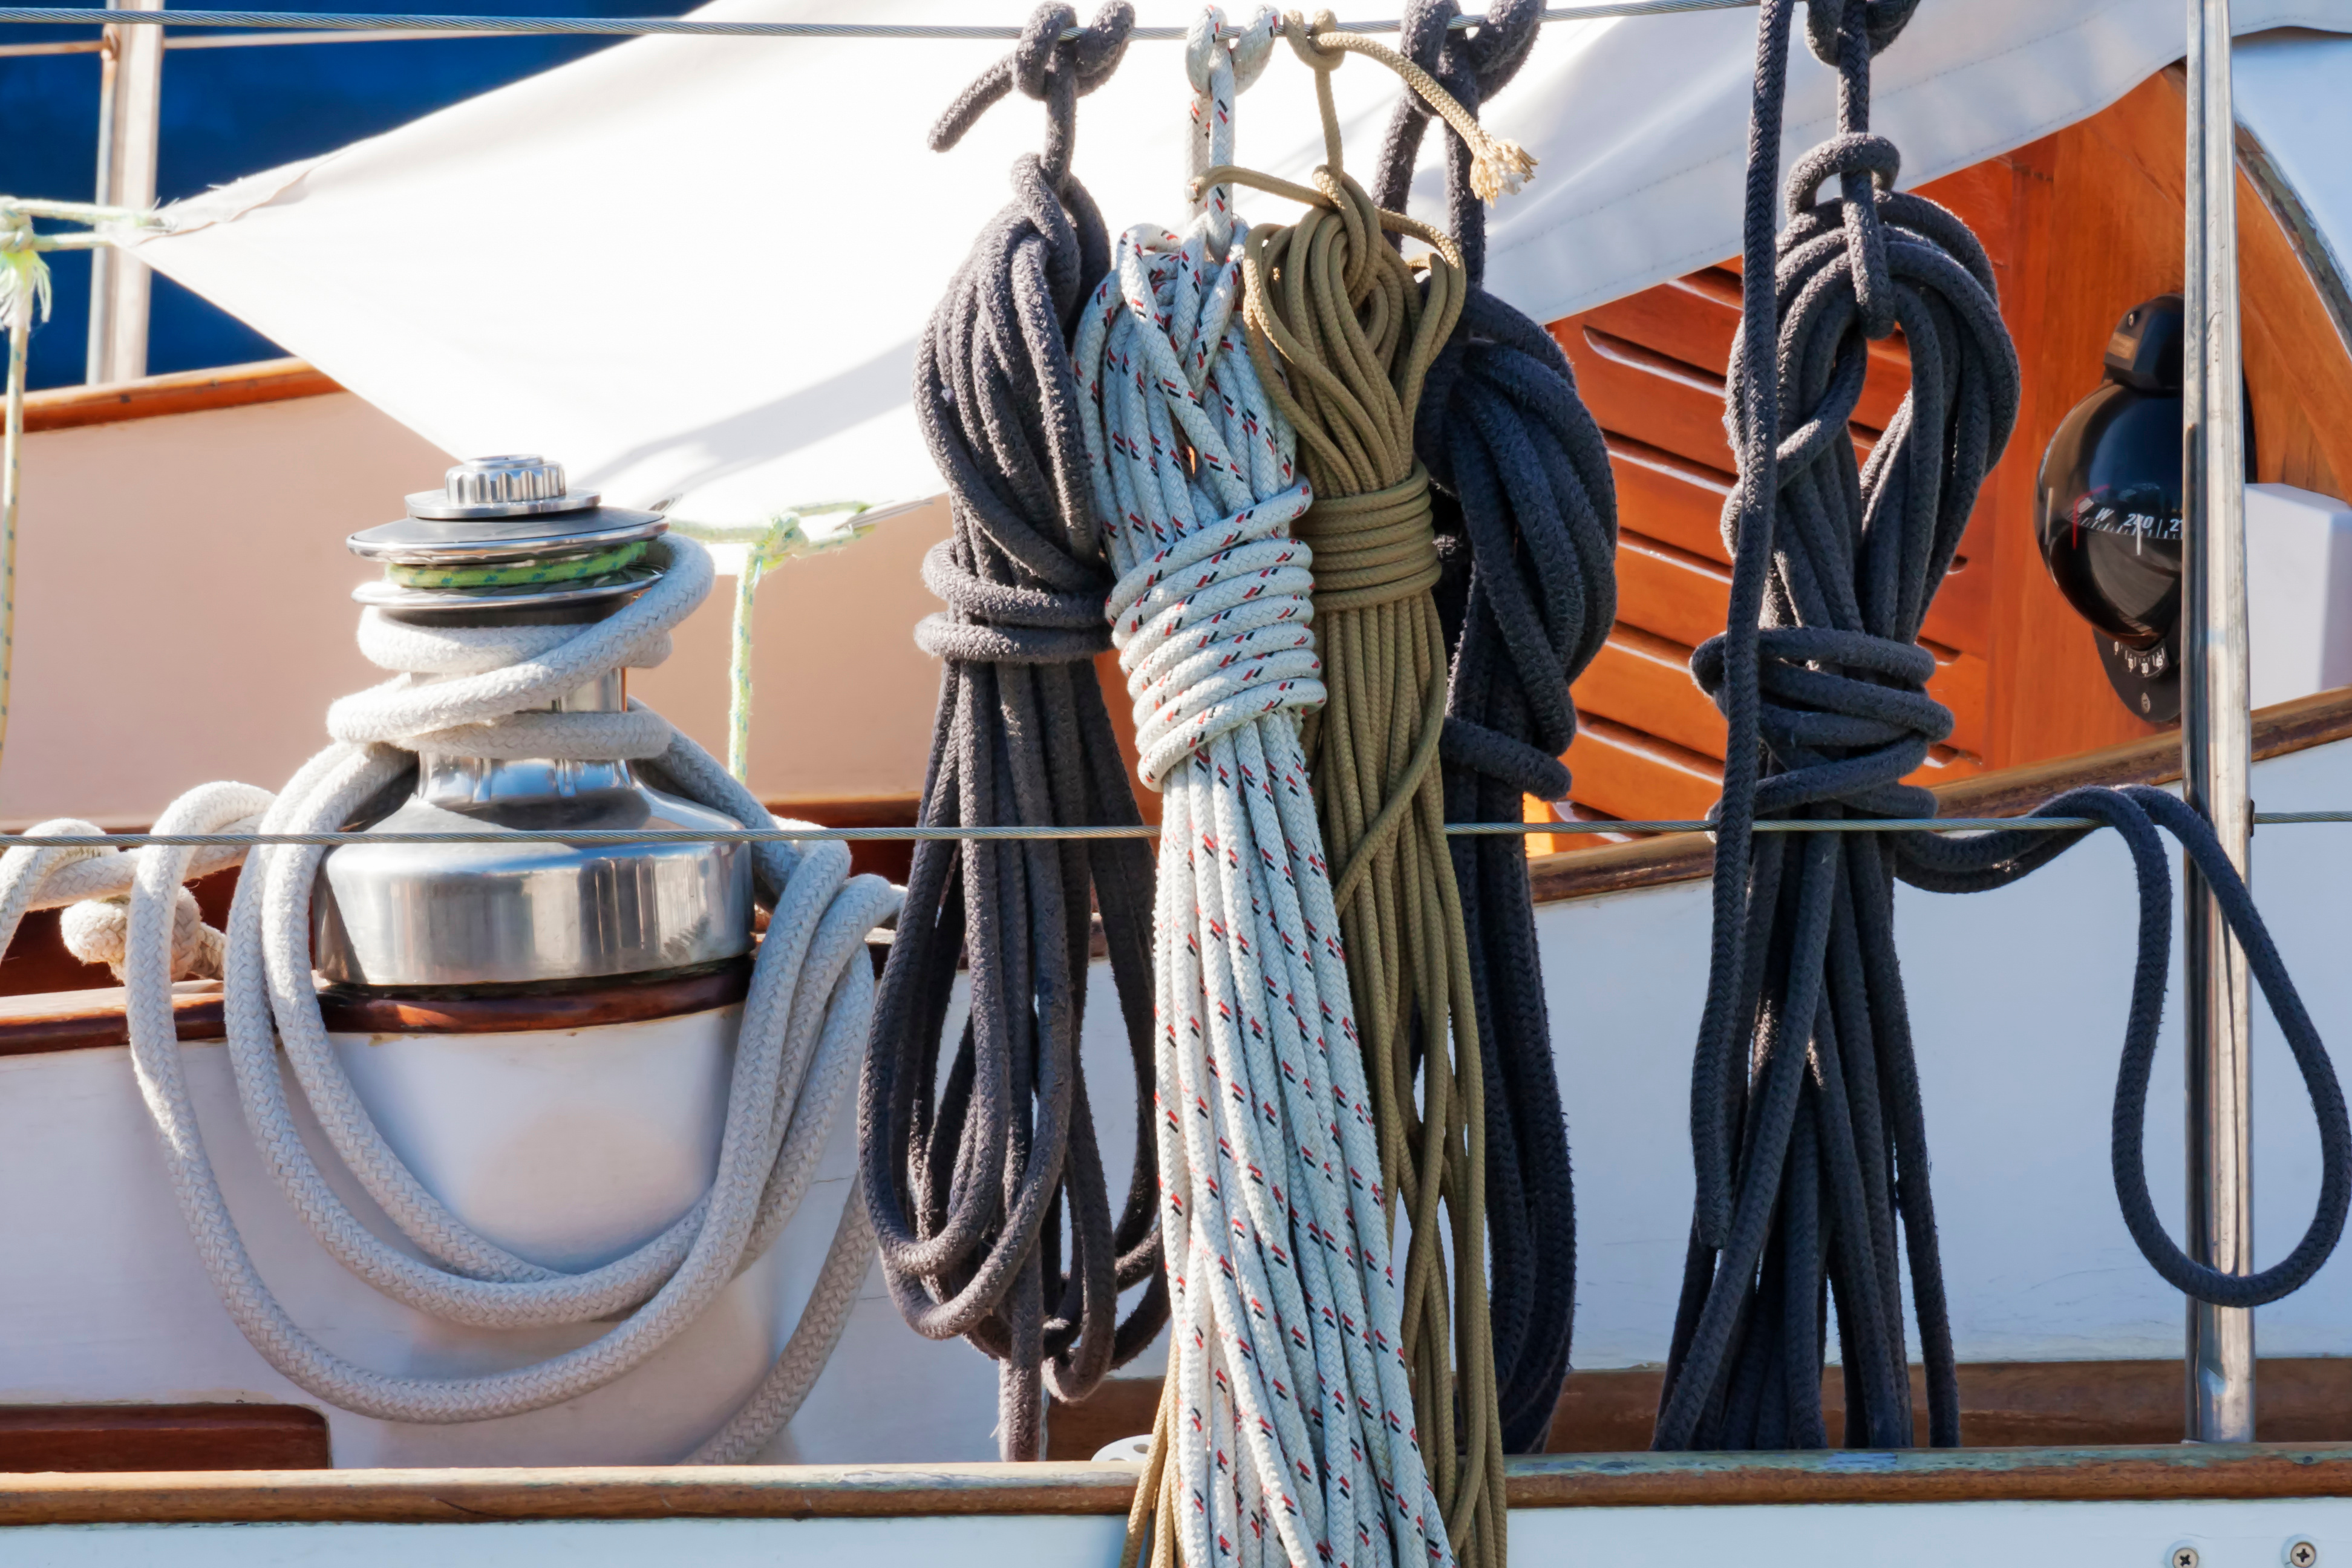 Boating Equipment & Accessories